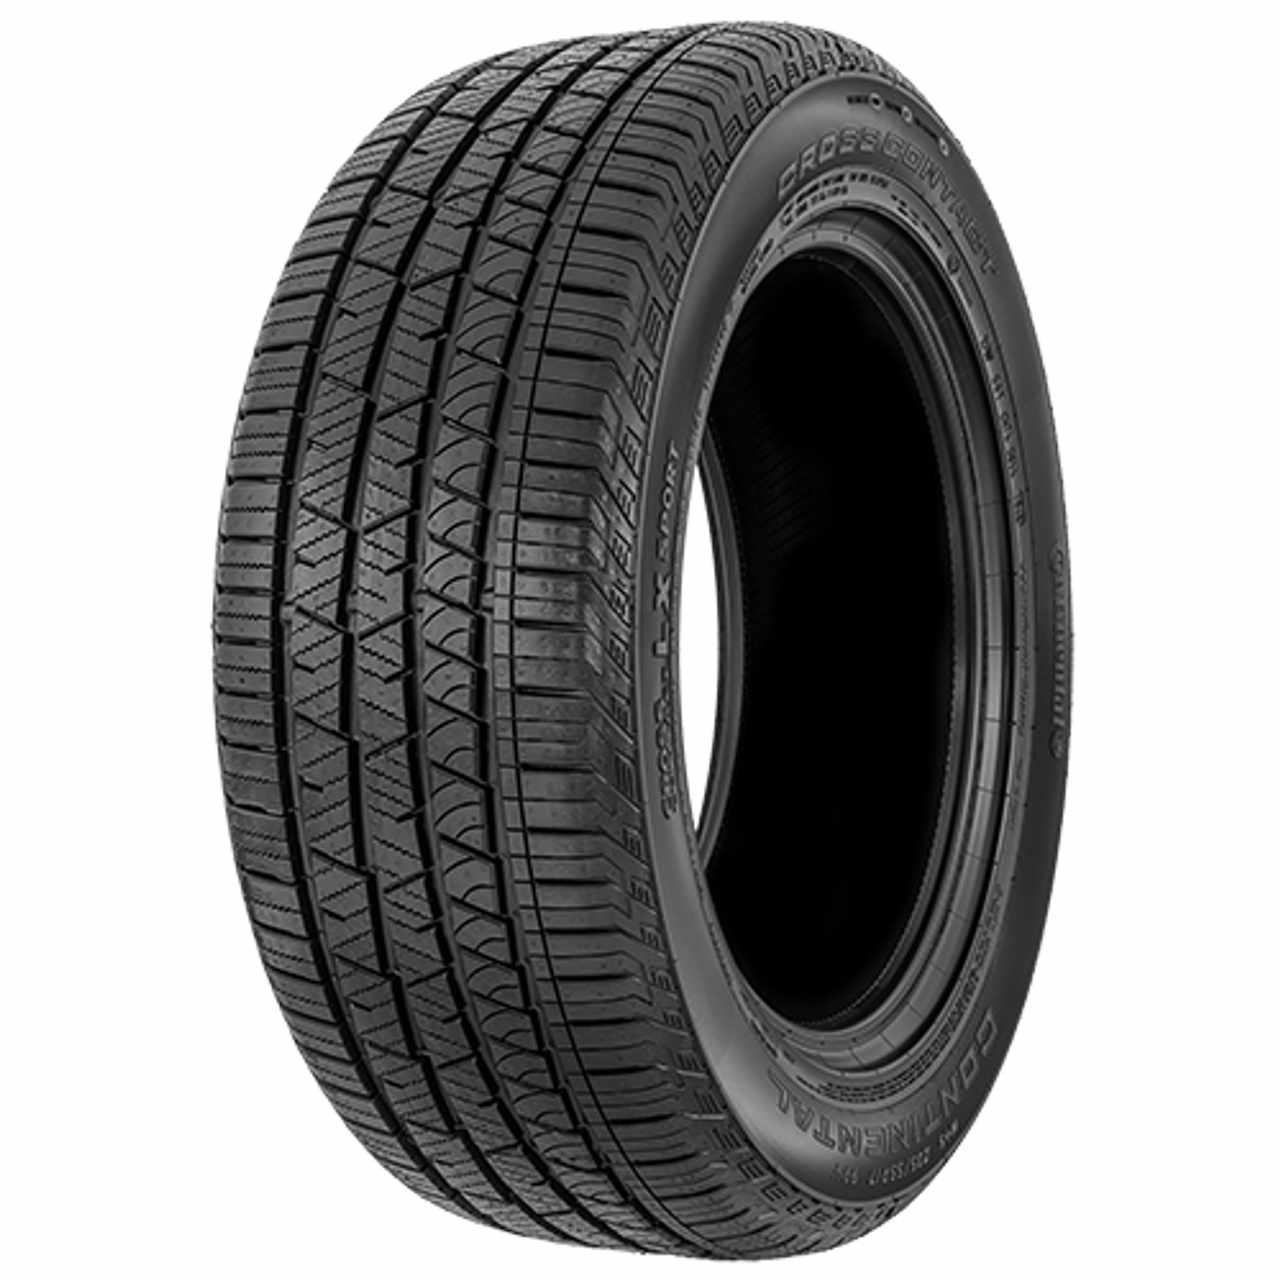 CONTINENTAL CROSSCONTACT LX SPORT (MGT) (EVc) 235/55R19 101W FR BSW